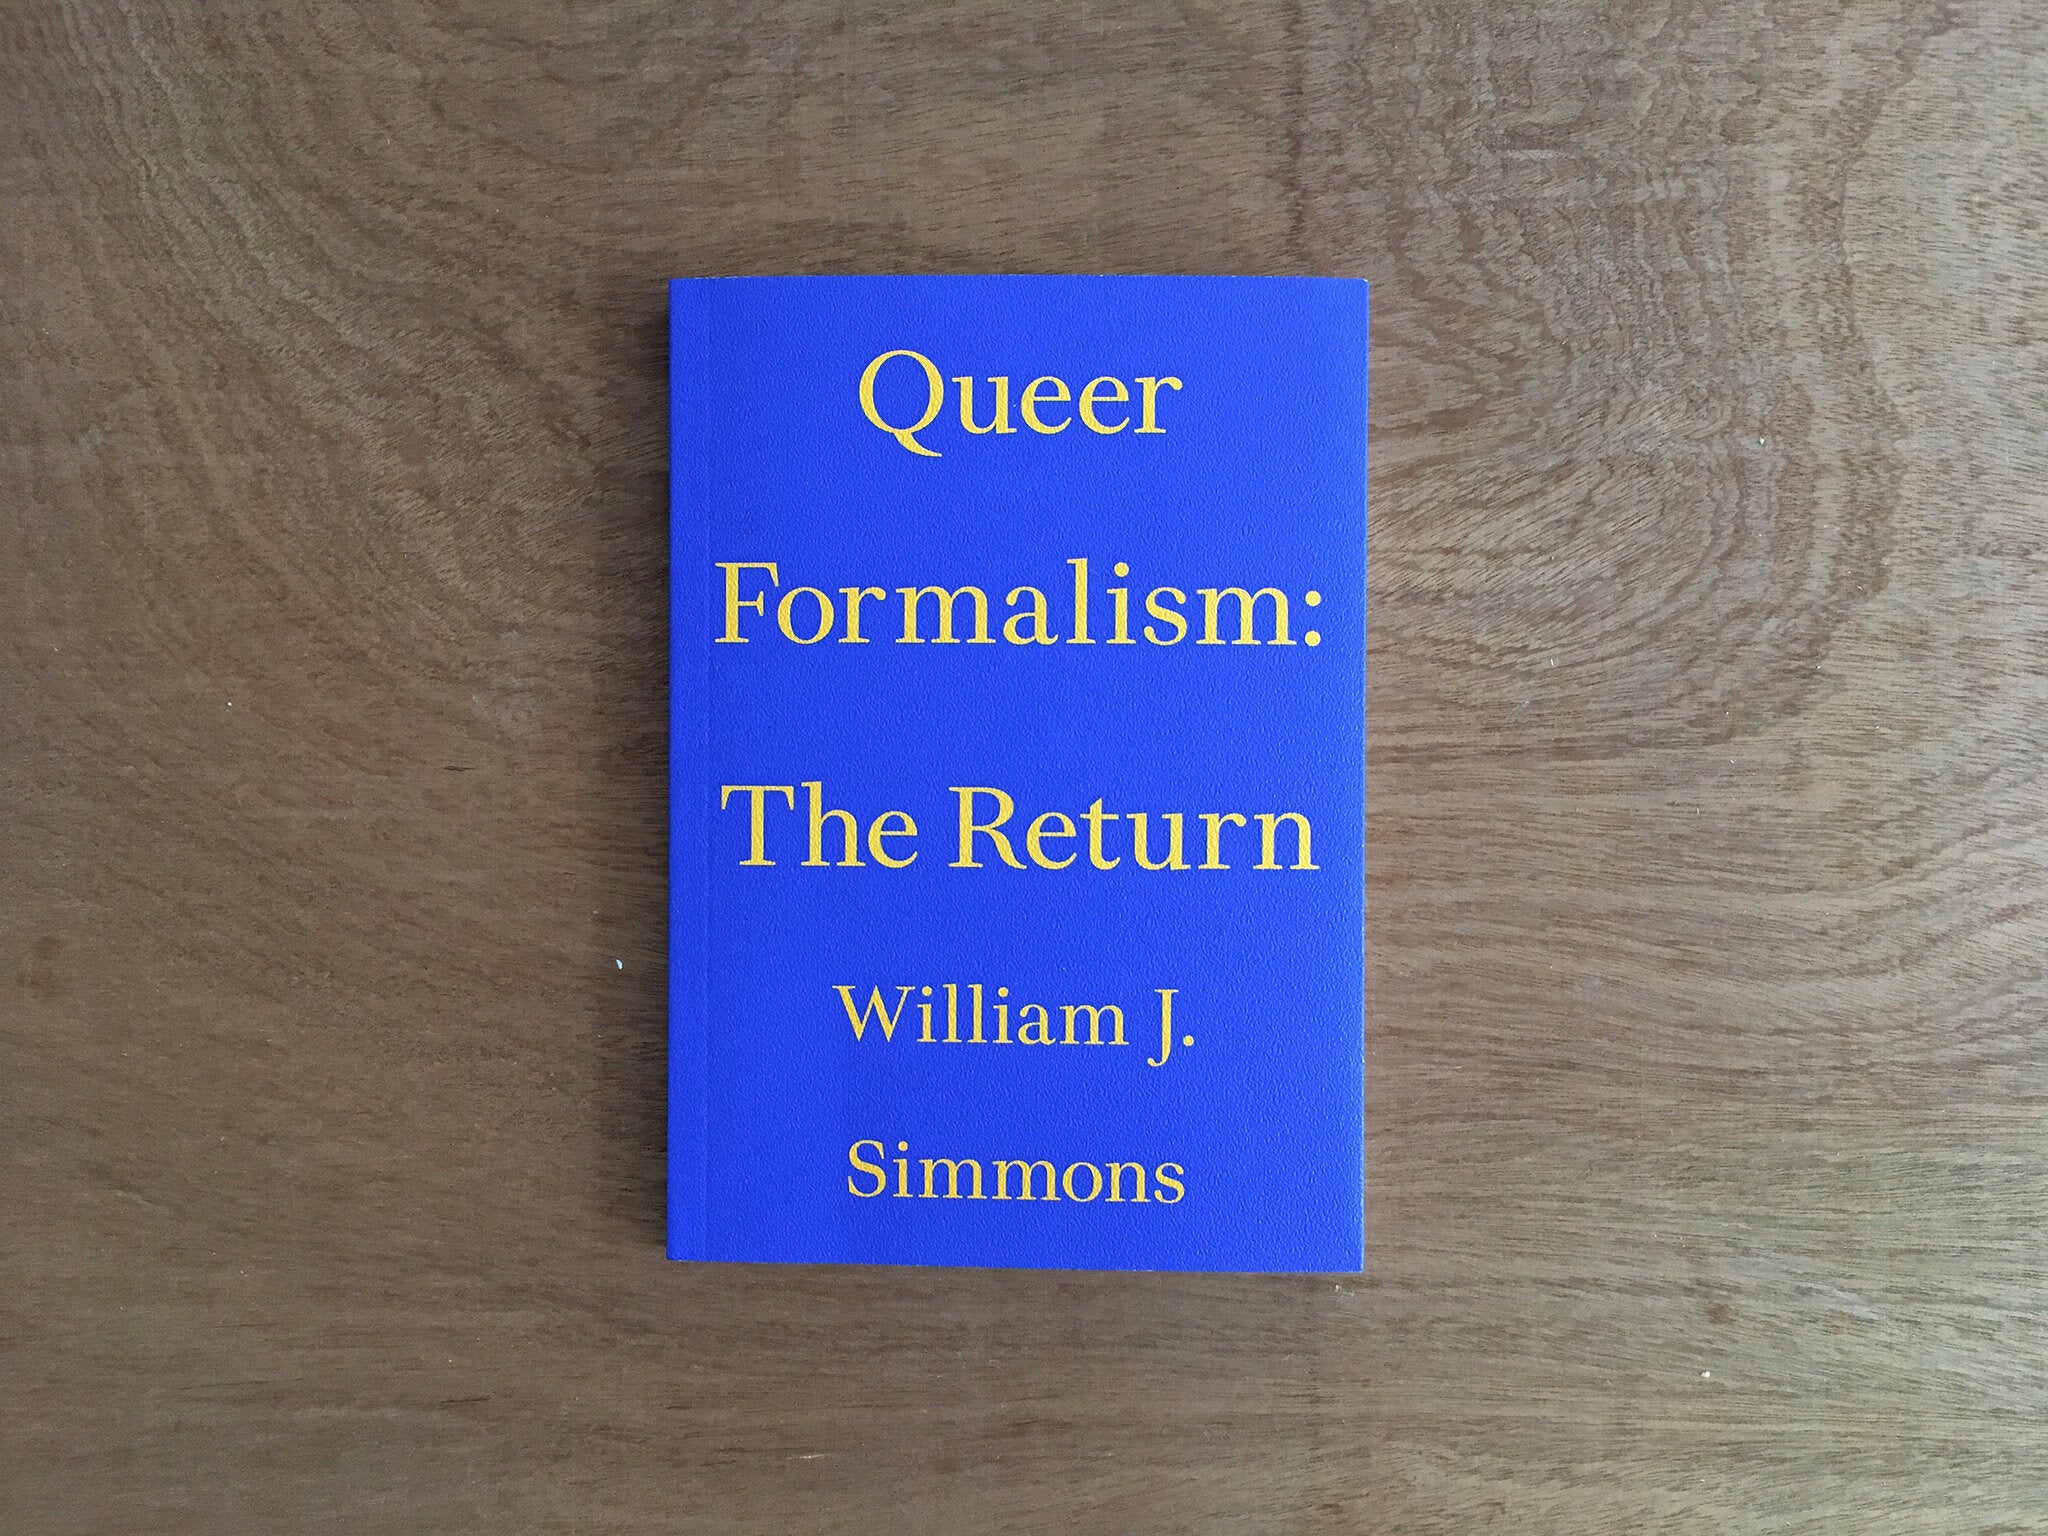 QUEER FORMALISM: THE RETURN by William J. Simmons